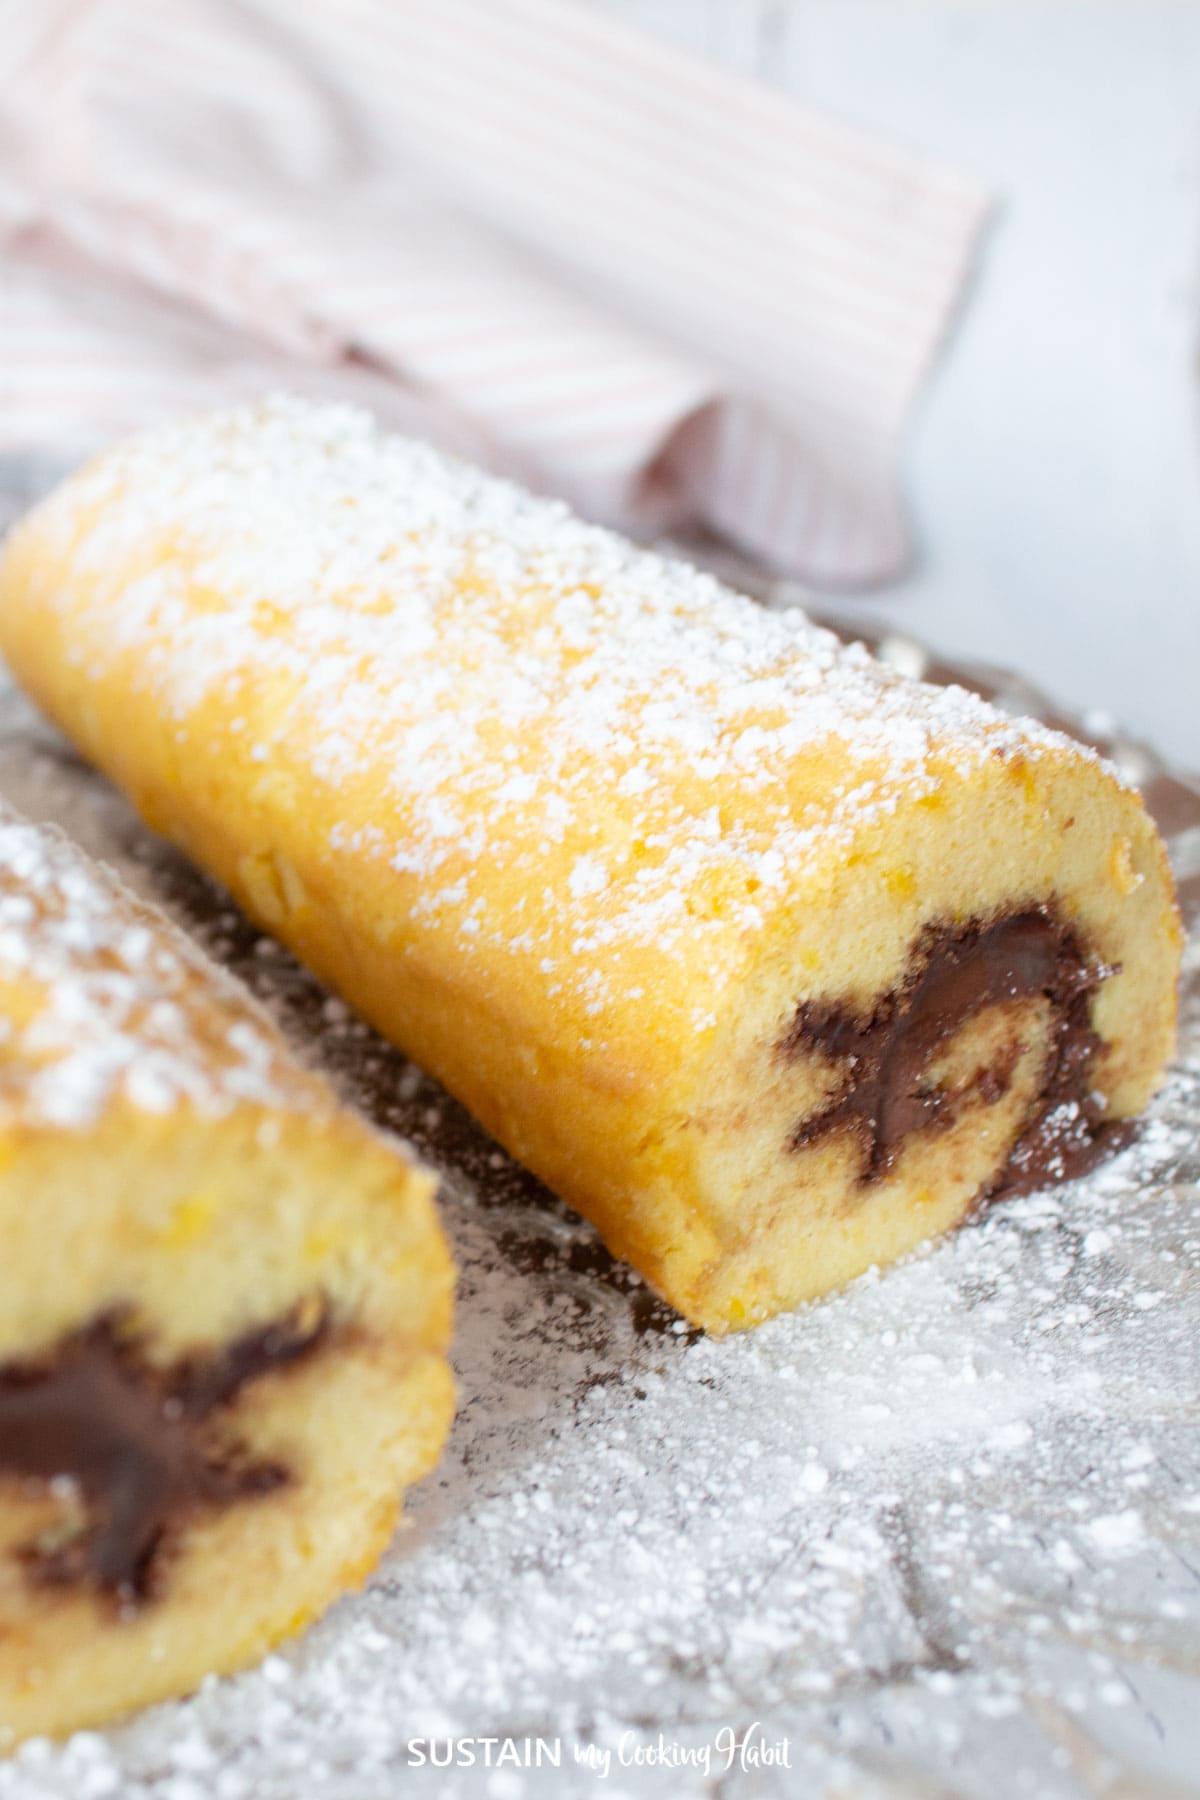 Nutella swiss roll dusted with powder sugar on a plate.